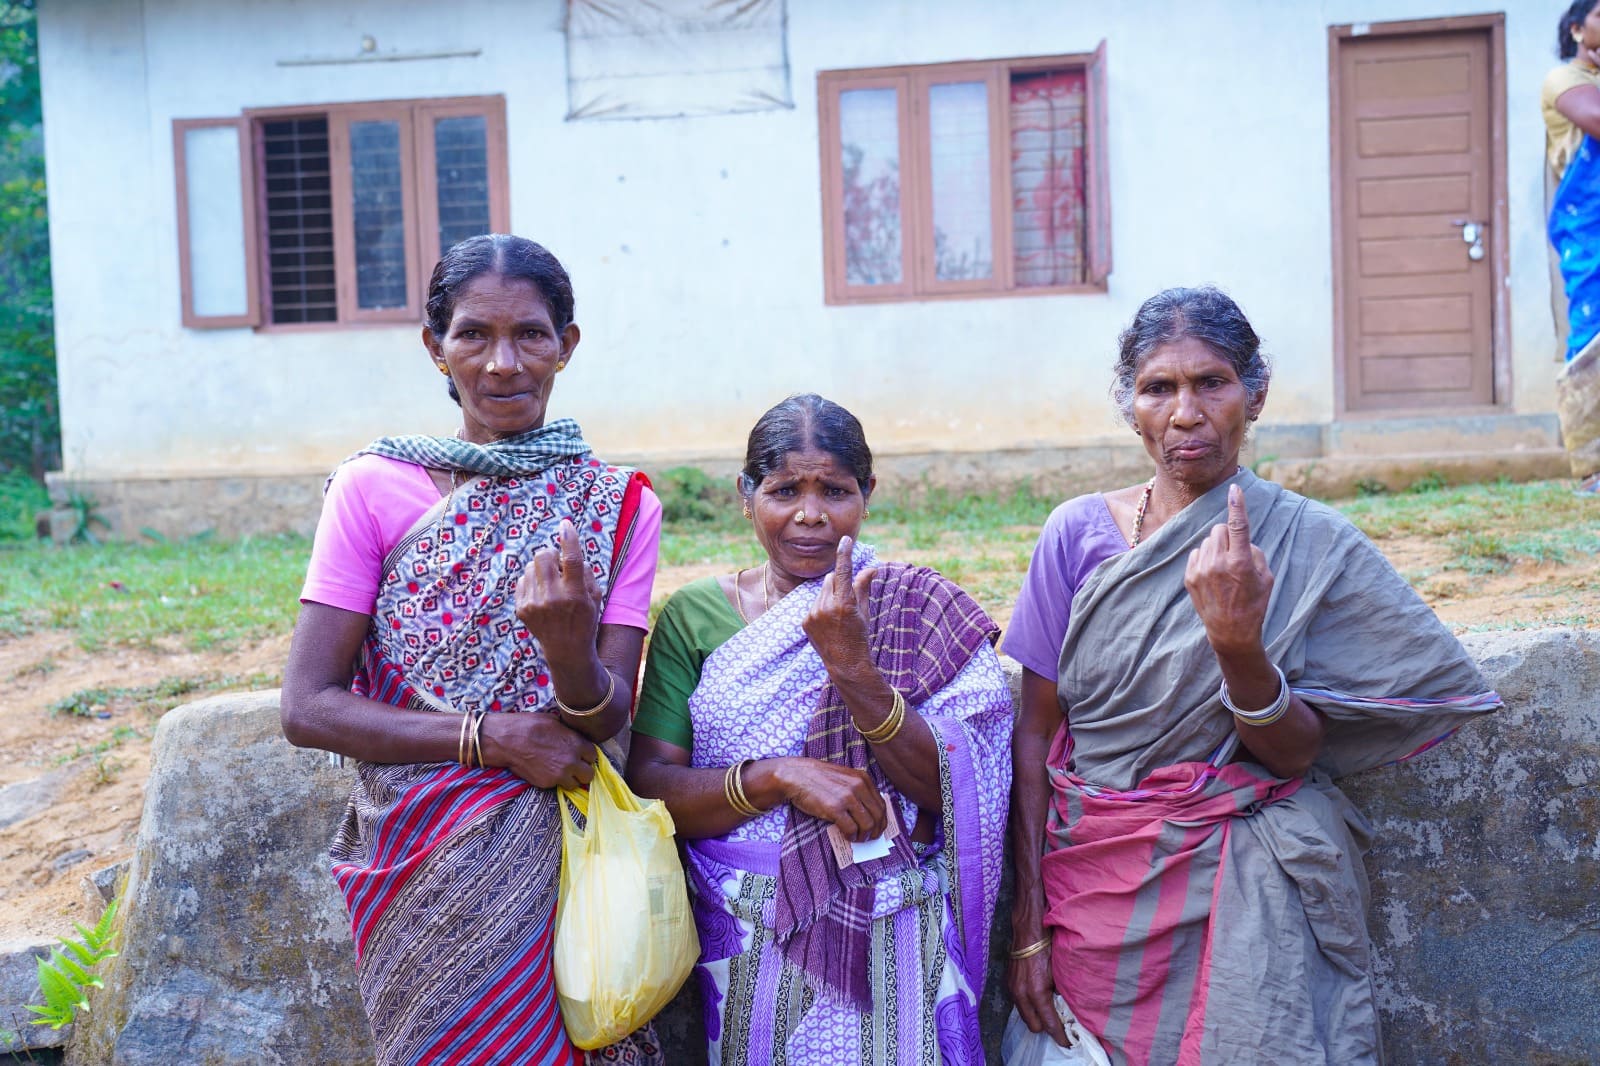 Tribeswomen of Idamalakkudi pose for a photograph after casting their votes on Friday. Idamalakkudi (also Edamalakkudi) is a remote tribal village located between the Idamalayar Forest Reserve and Mankulam Forest Division in Idukki. Muthuvans are the only tribe living in the hamlet.